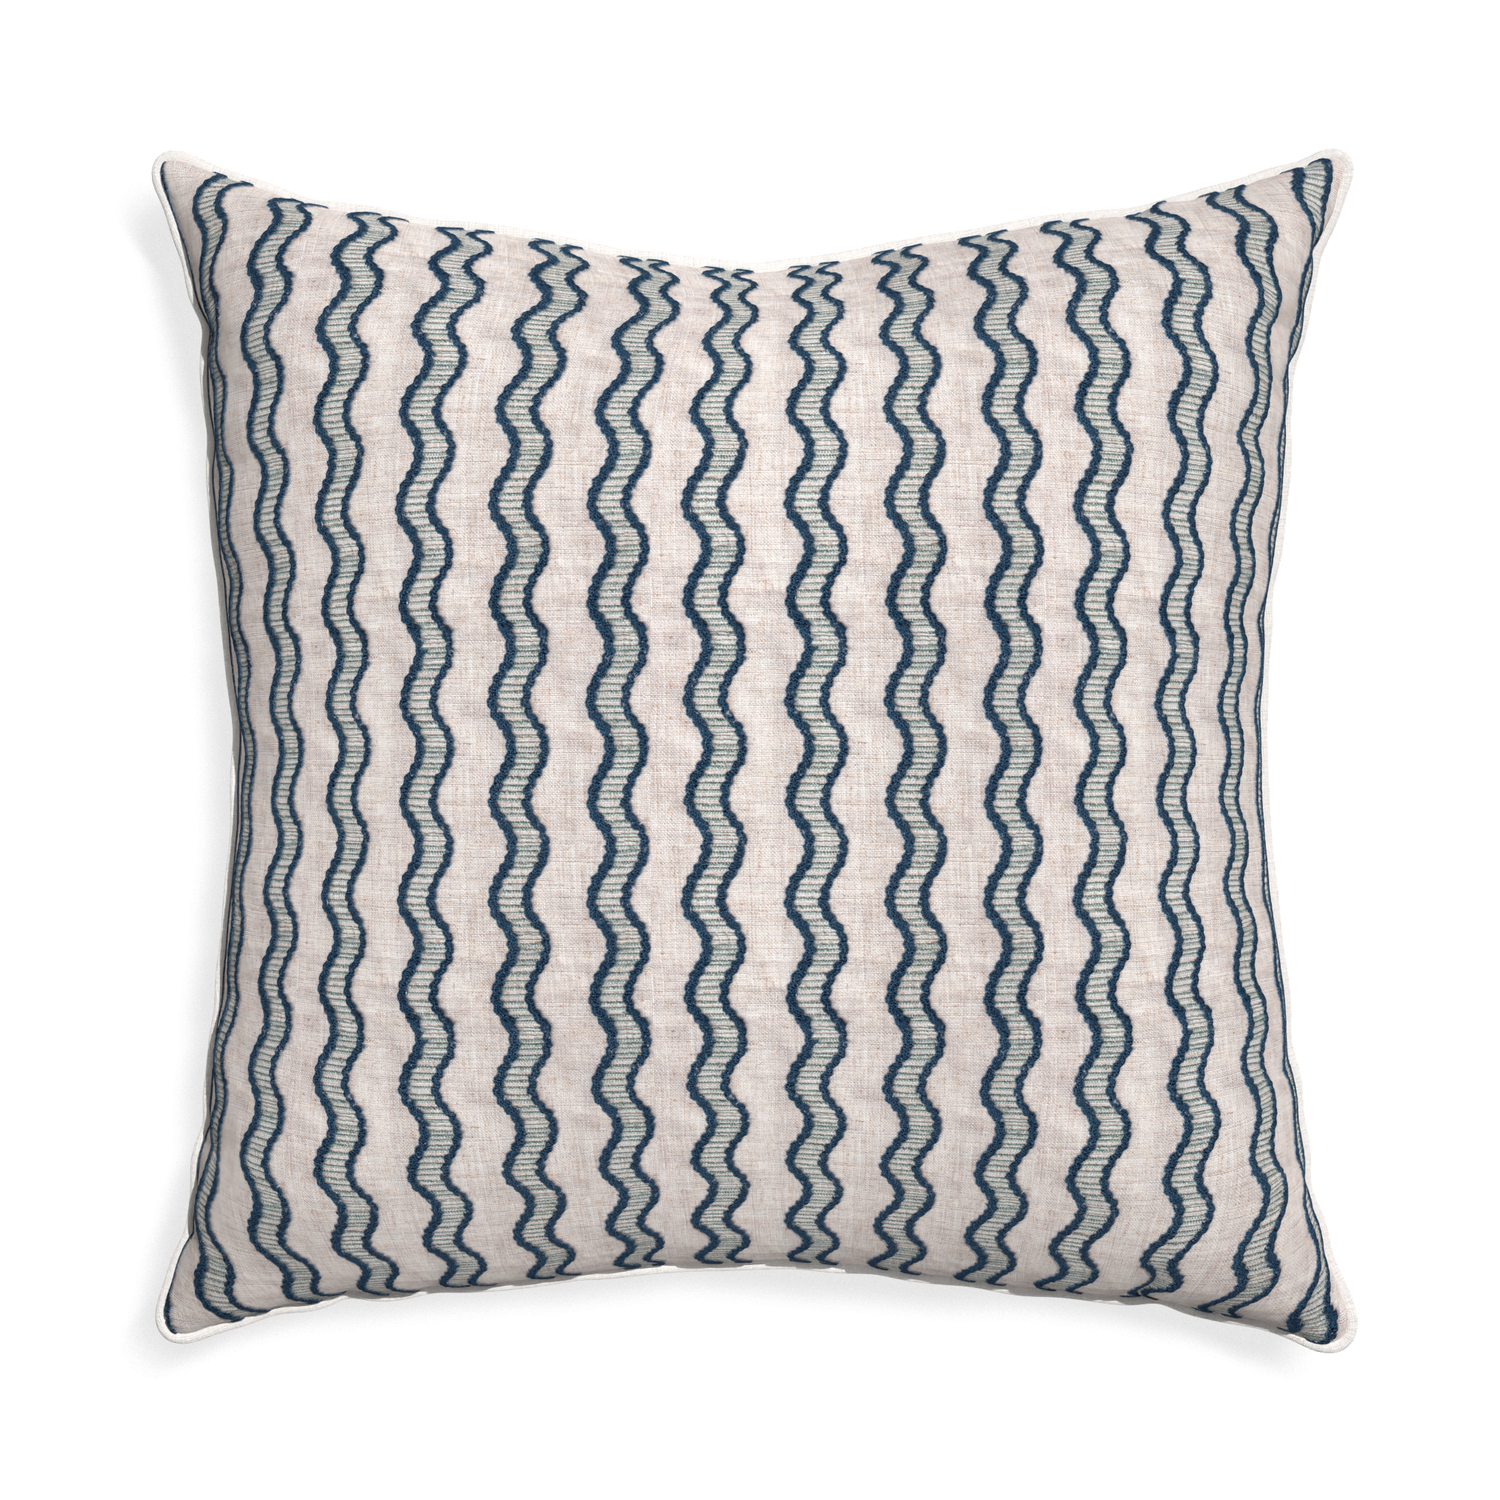 Euro-sham beatrice custom embroidered wavepillow with snow piping on white background